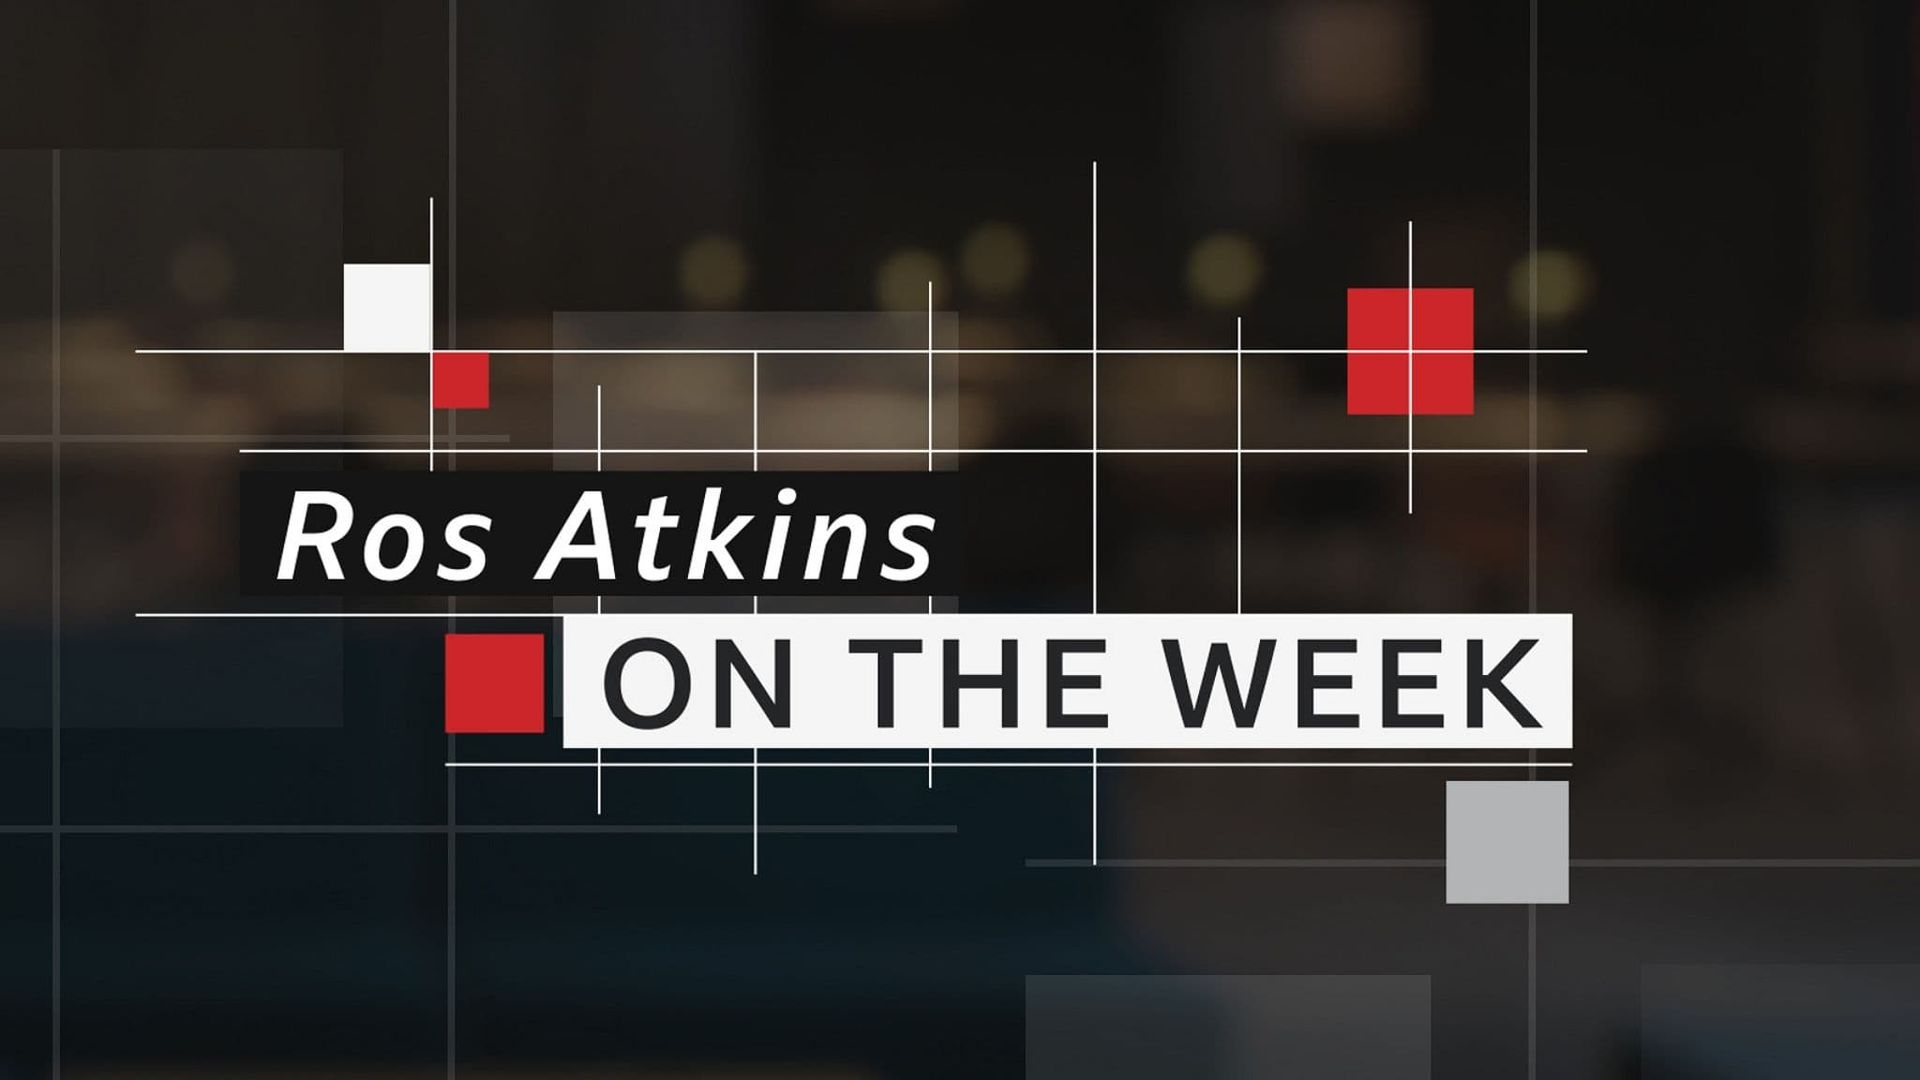 Ros Atkins on the Week background